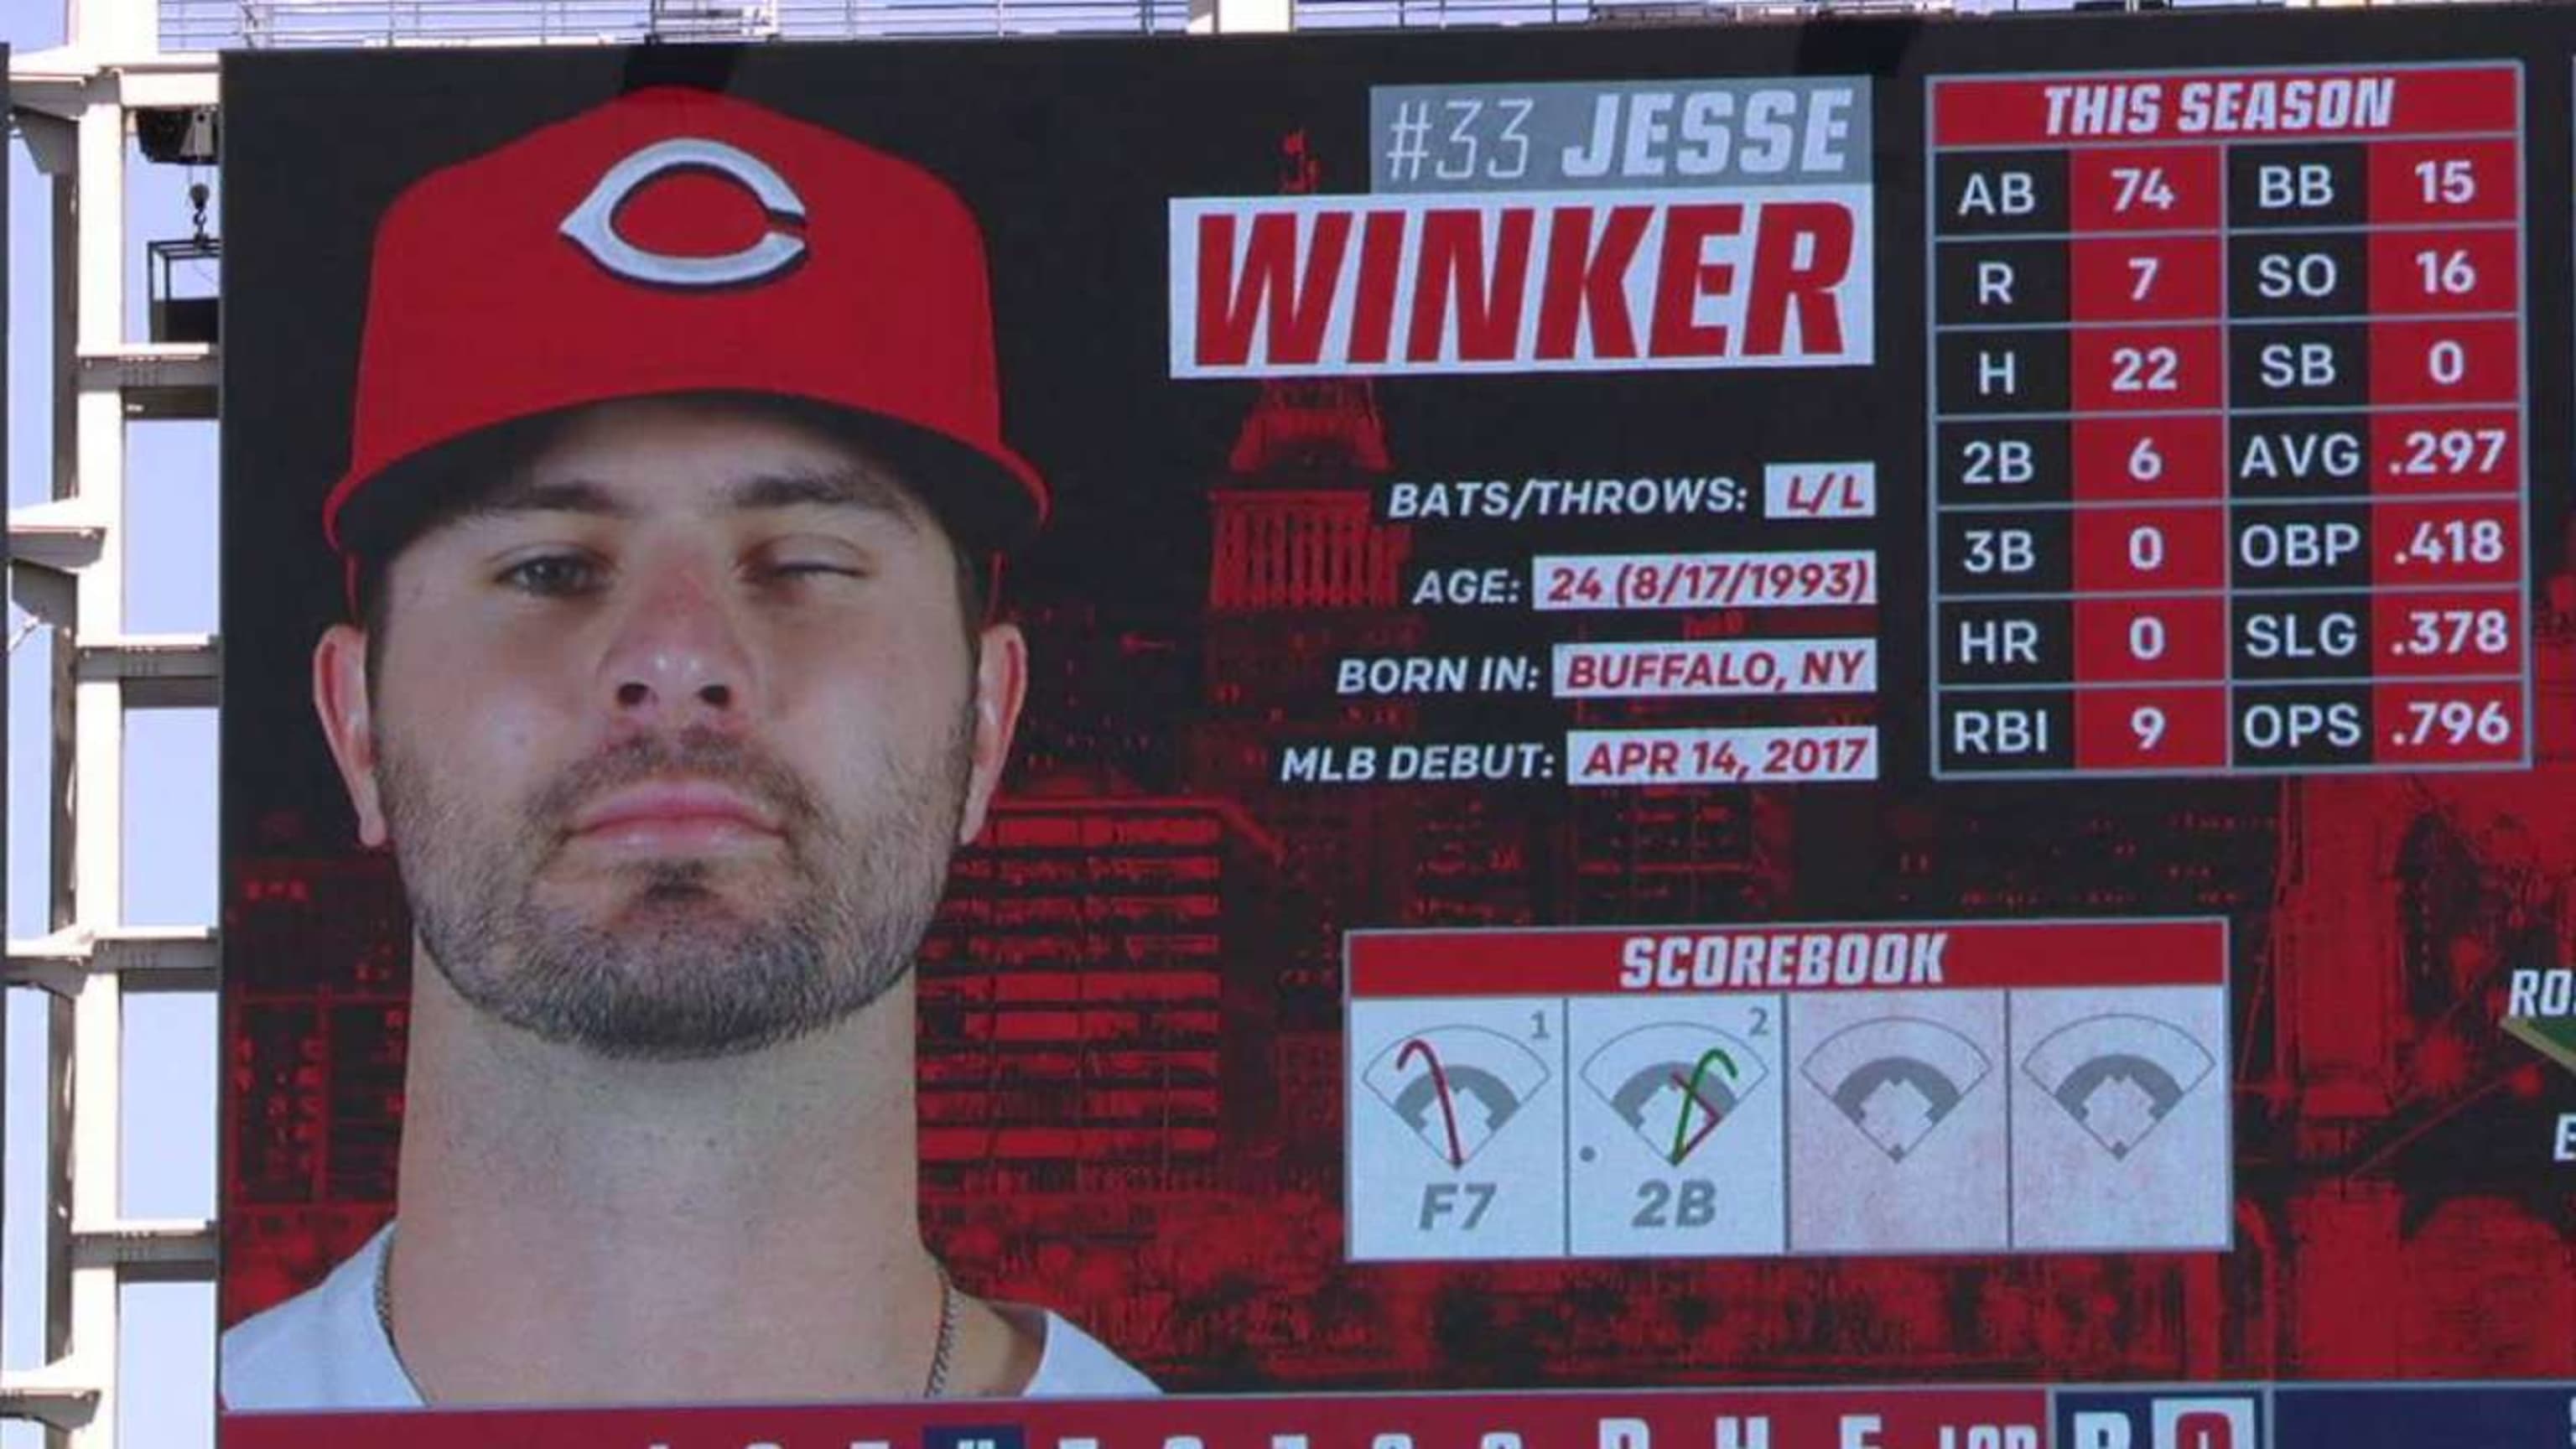 The Target Field video board made the Reds' Jesse Winker live up to his  name